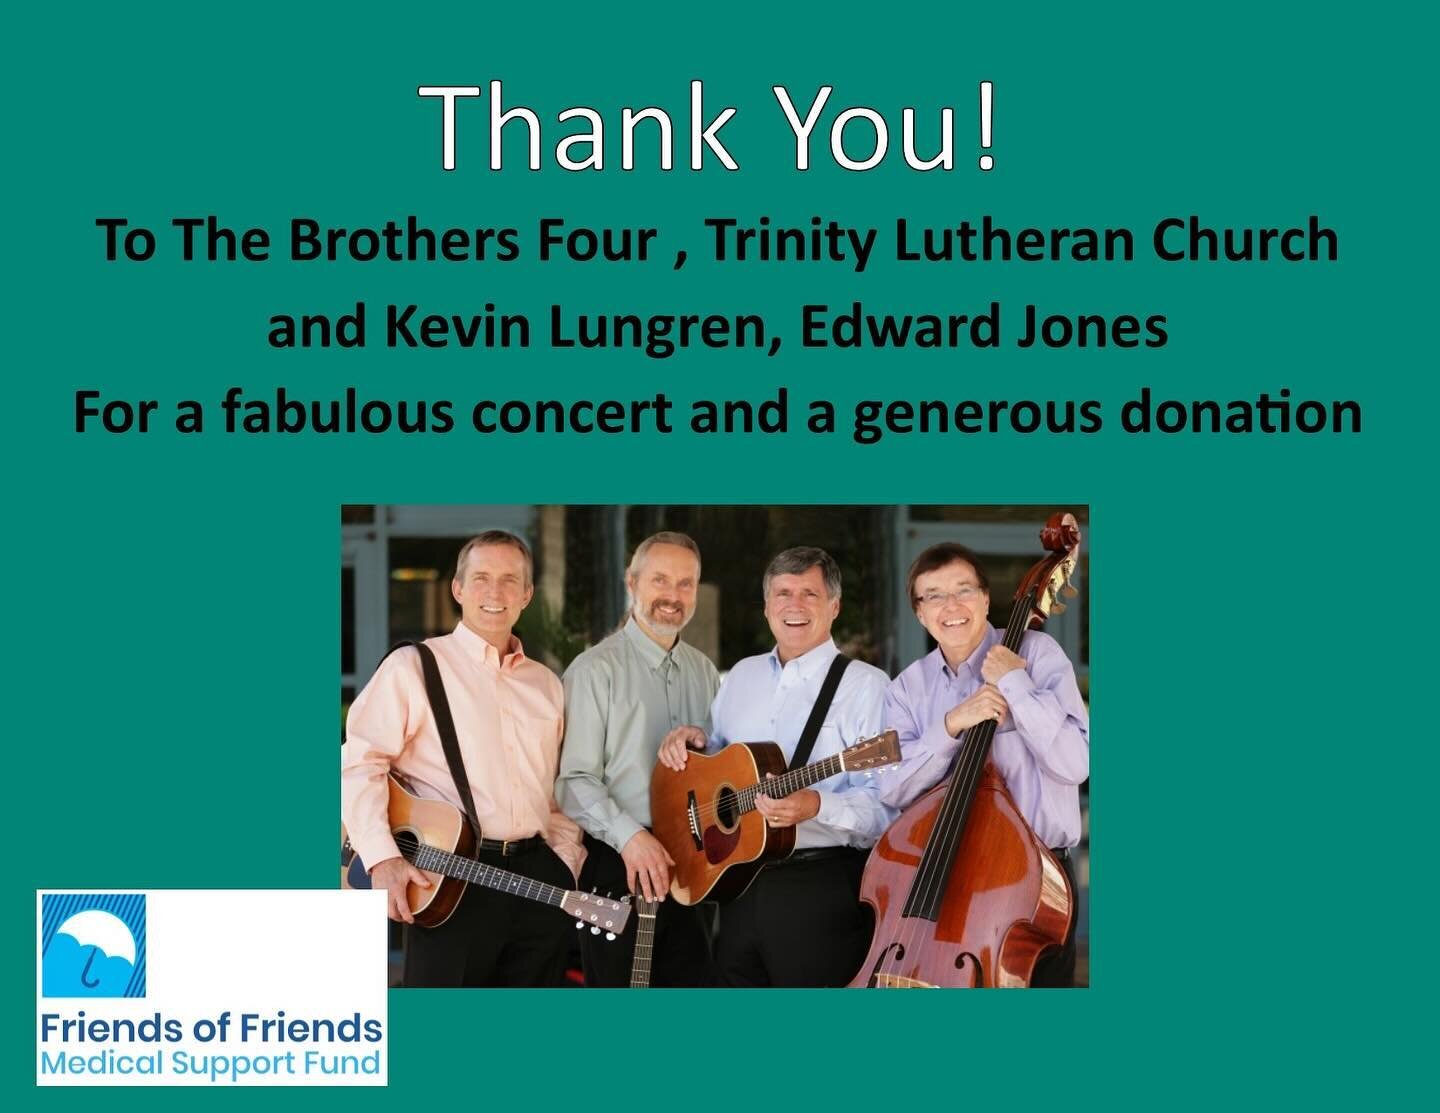 What a wonderful community gathering and fantastic music yesterday! Big thanks to the Brothers Four, Trinity Lutheran Church and Kevin Lungren, Edward Jones for your generous donation!